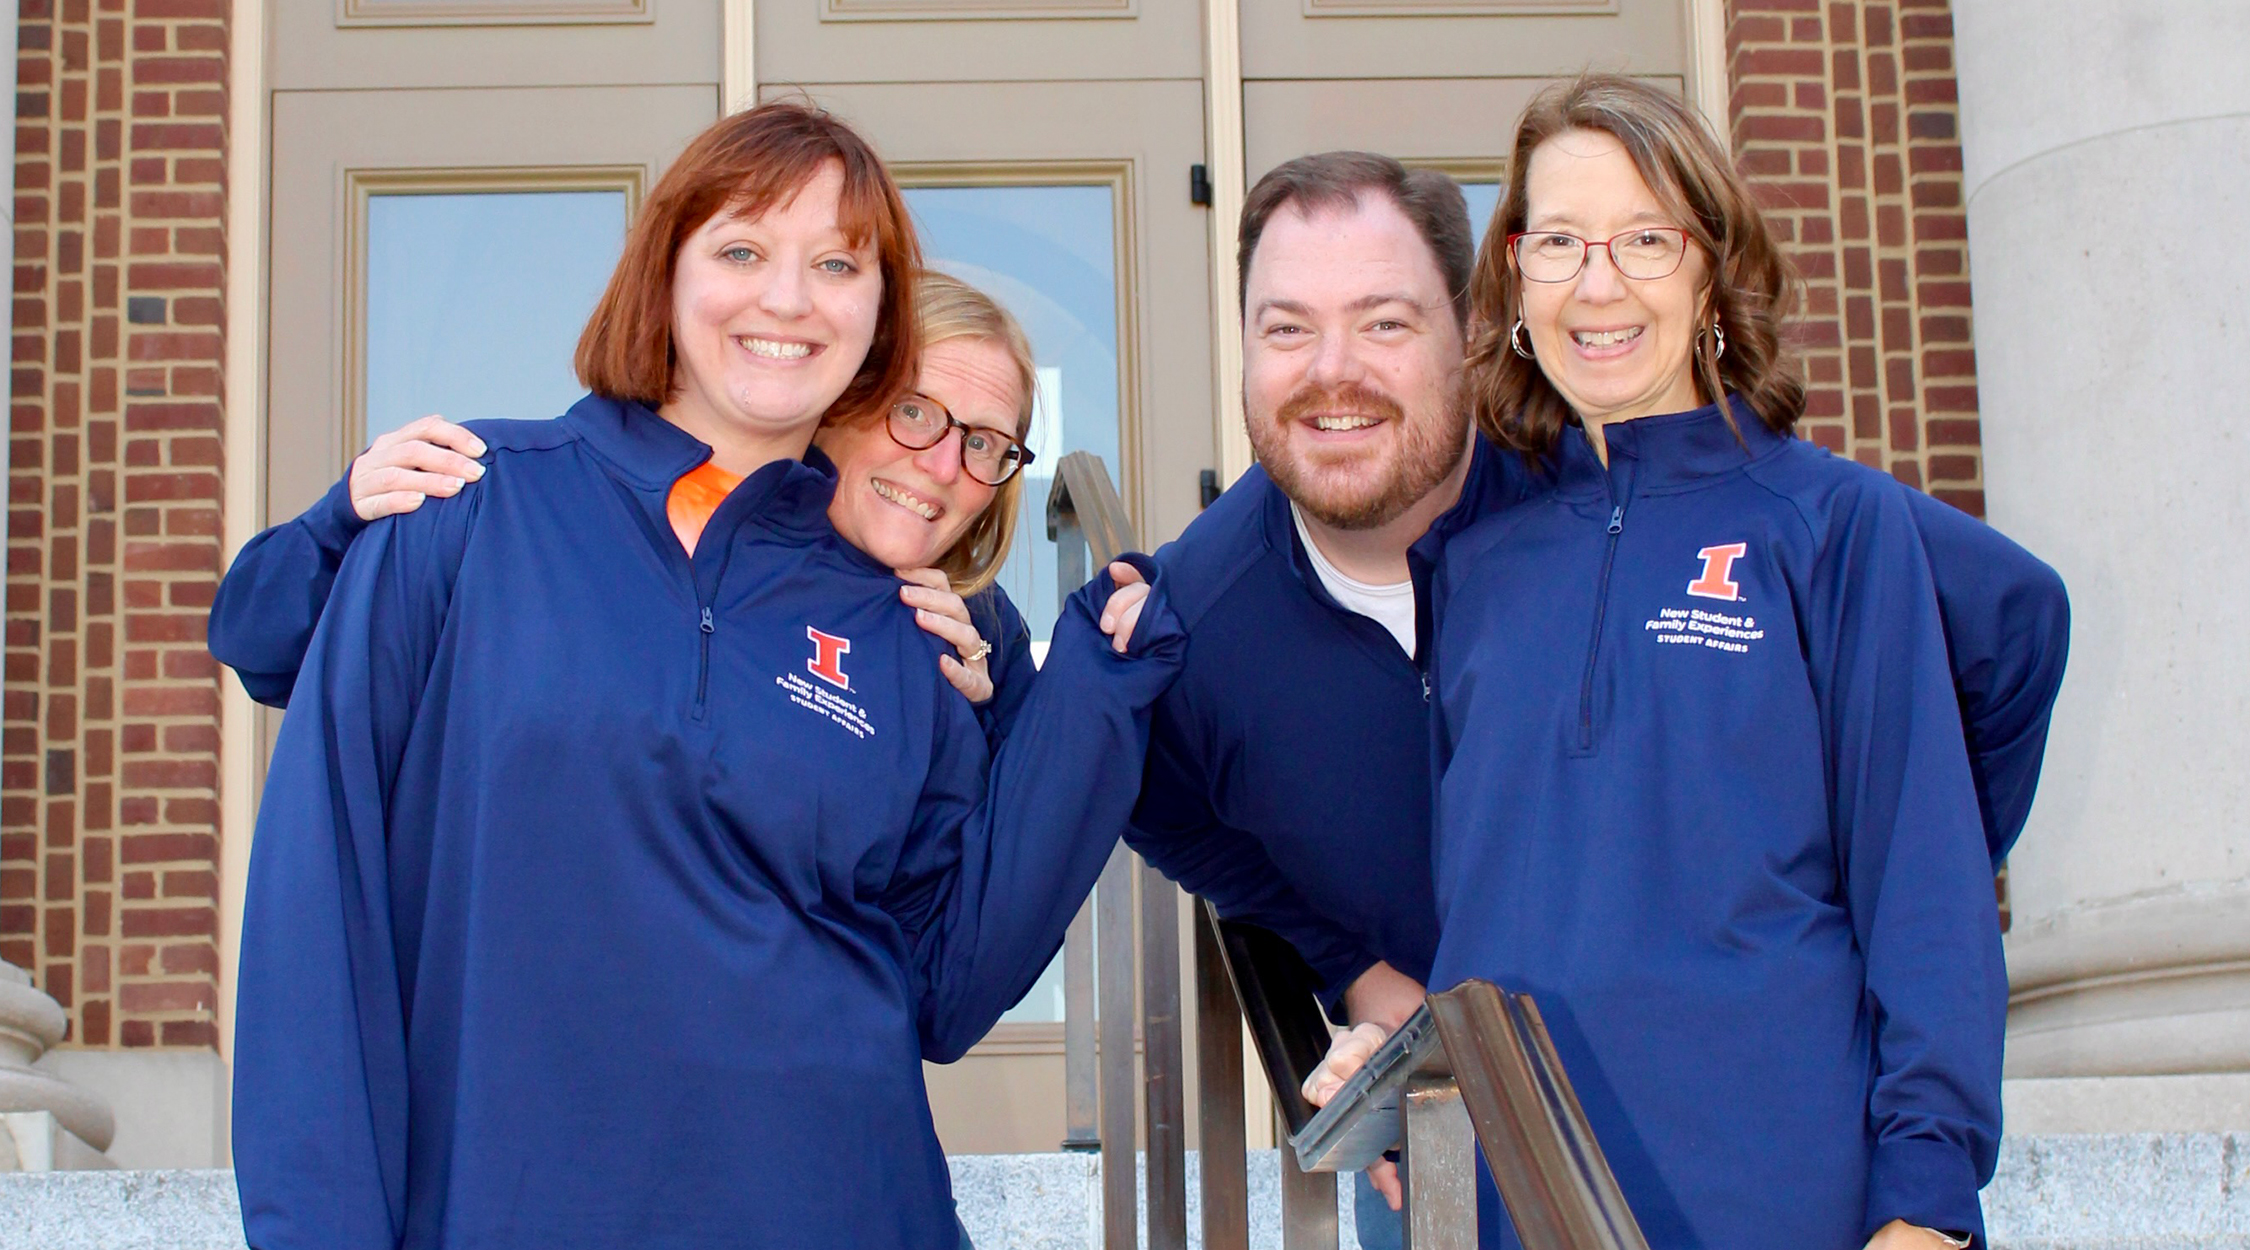 Four staff members smiling and embracing on steps in front of Foellinger Auditorium